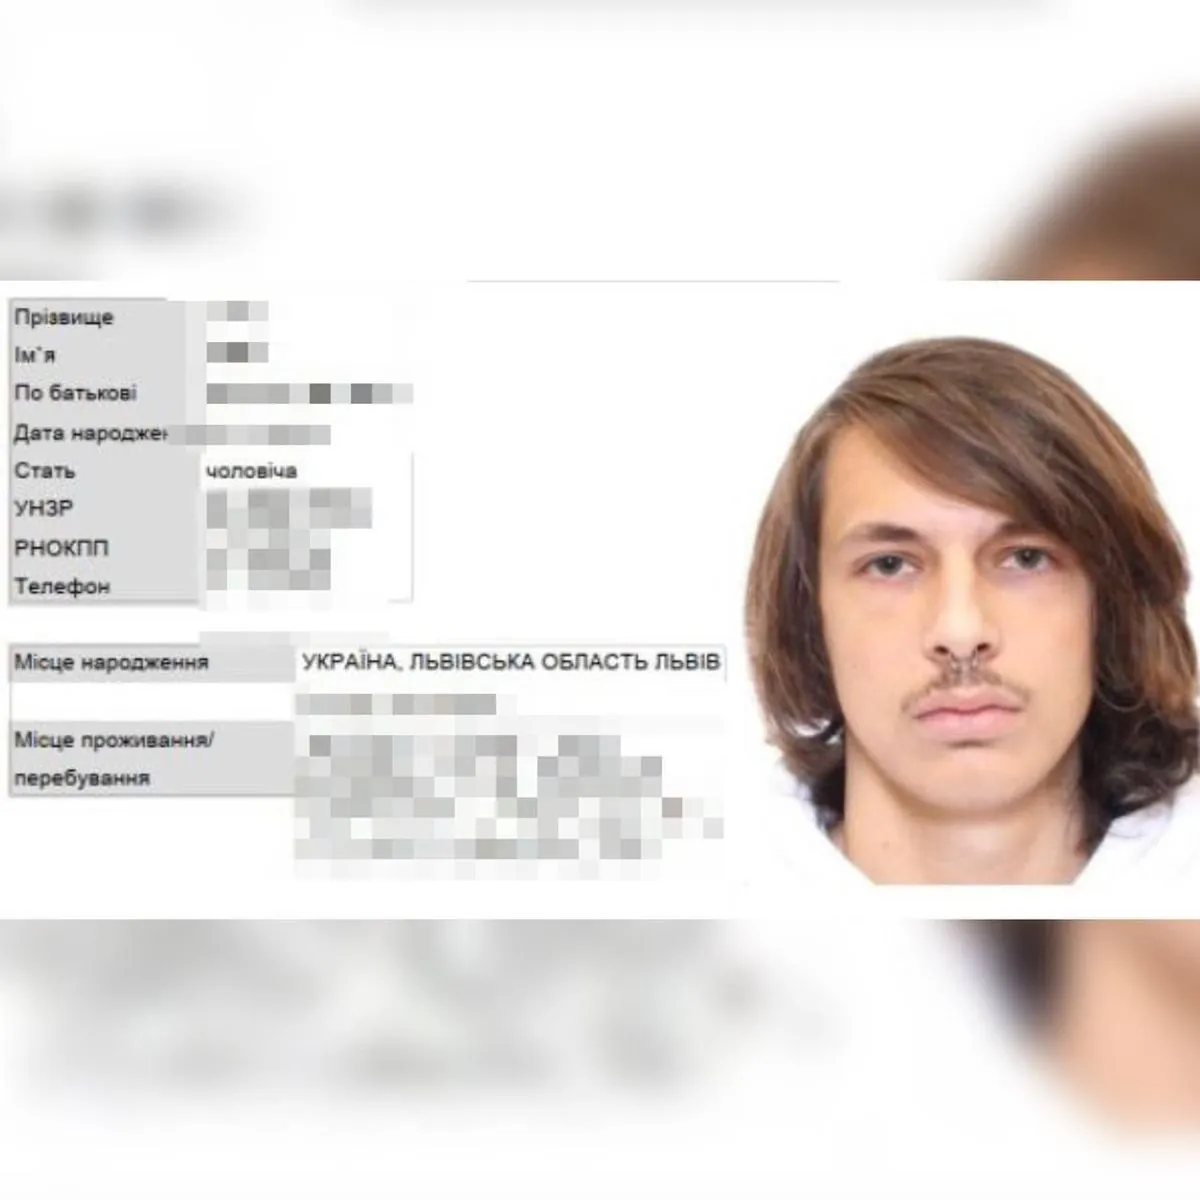 A photo of Irina Farion's alleged killer is being shared on Telegram channels. The Center for the Death Penalty claims it is a fake